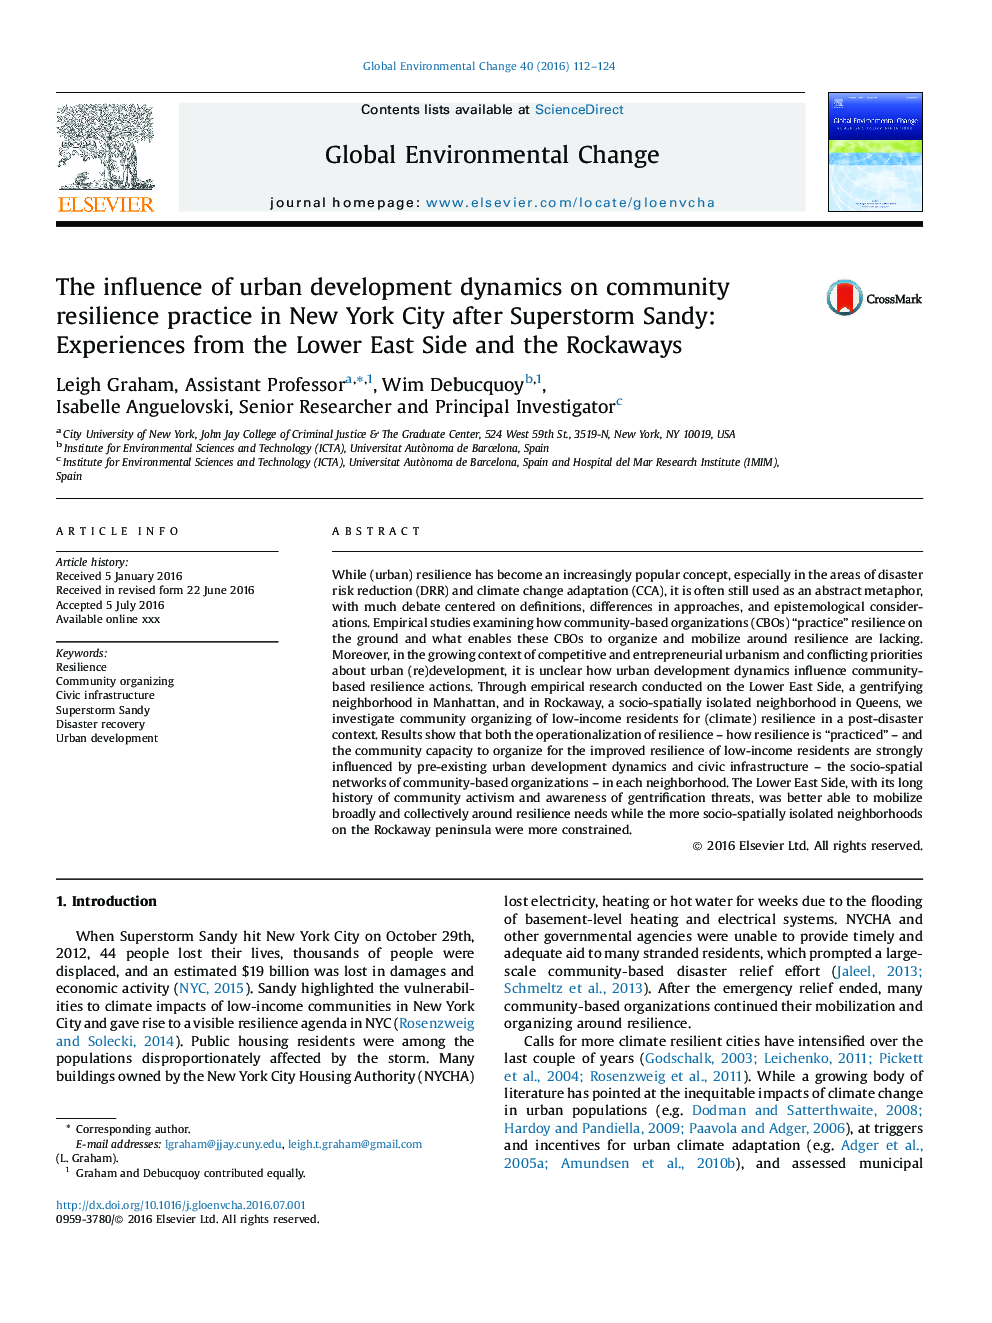 The influence of urban development dynamics on community resilience practice in New York City after Superstorm Sandy: Experiences from the Lower East Side and the Rockaways